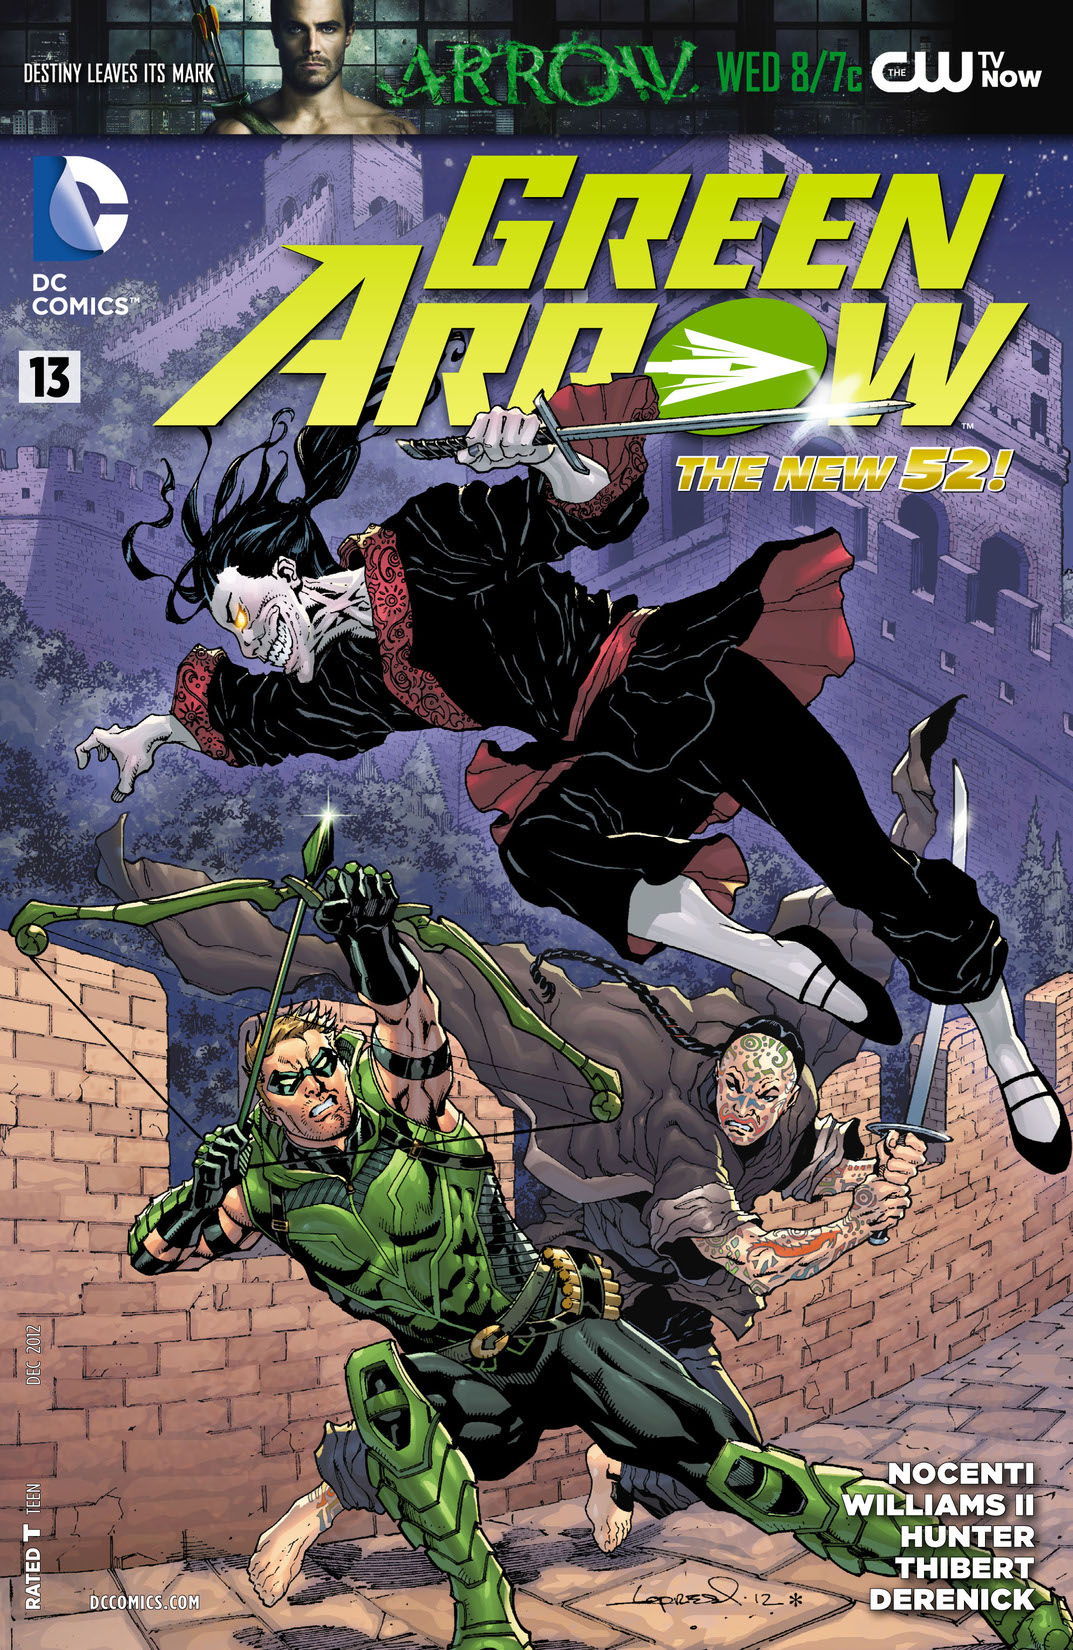 Green Arrow (2011-) #13 preview images